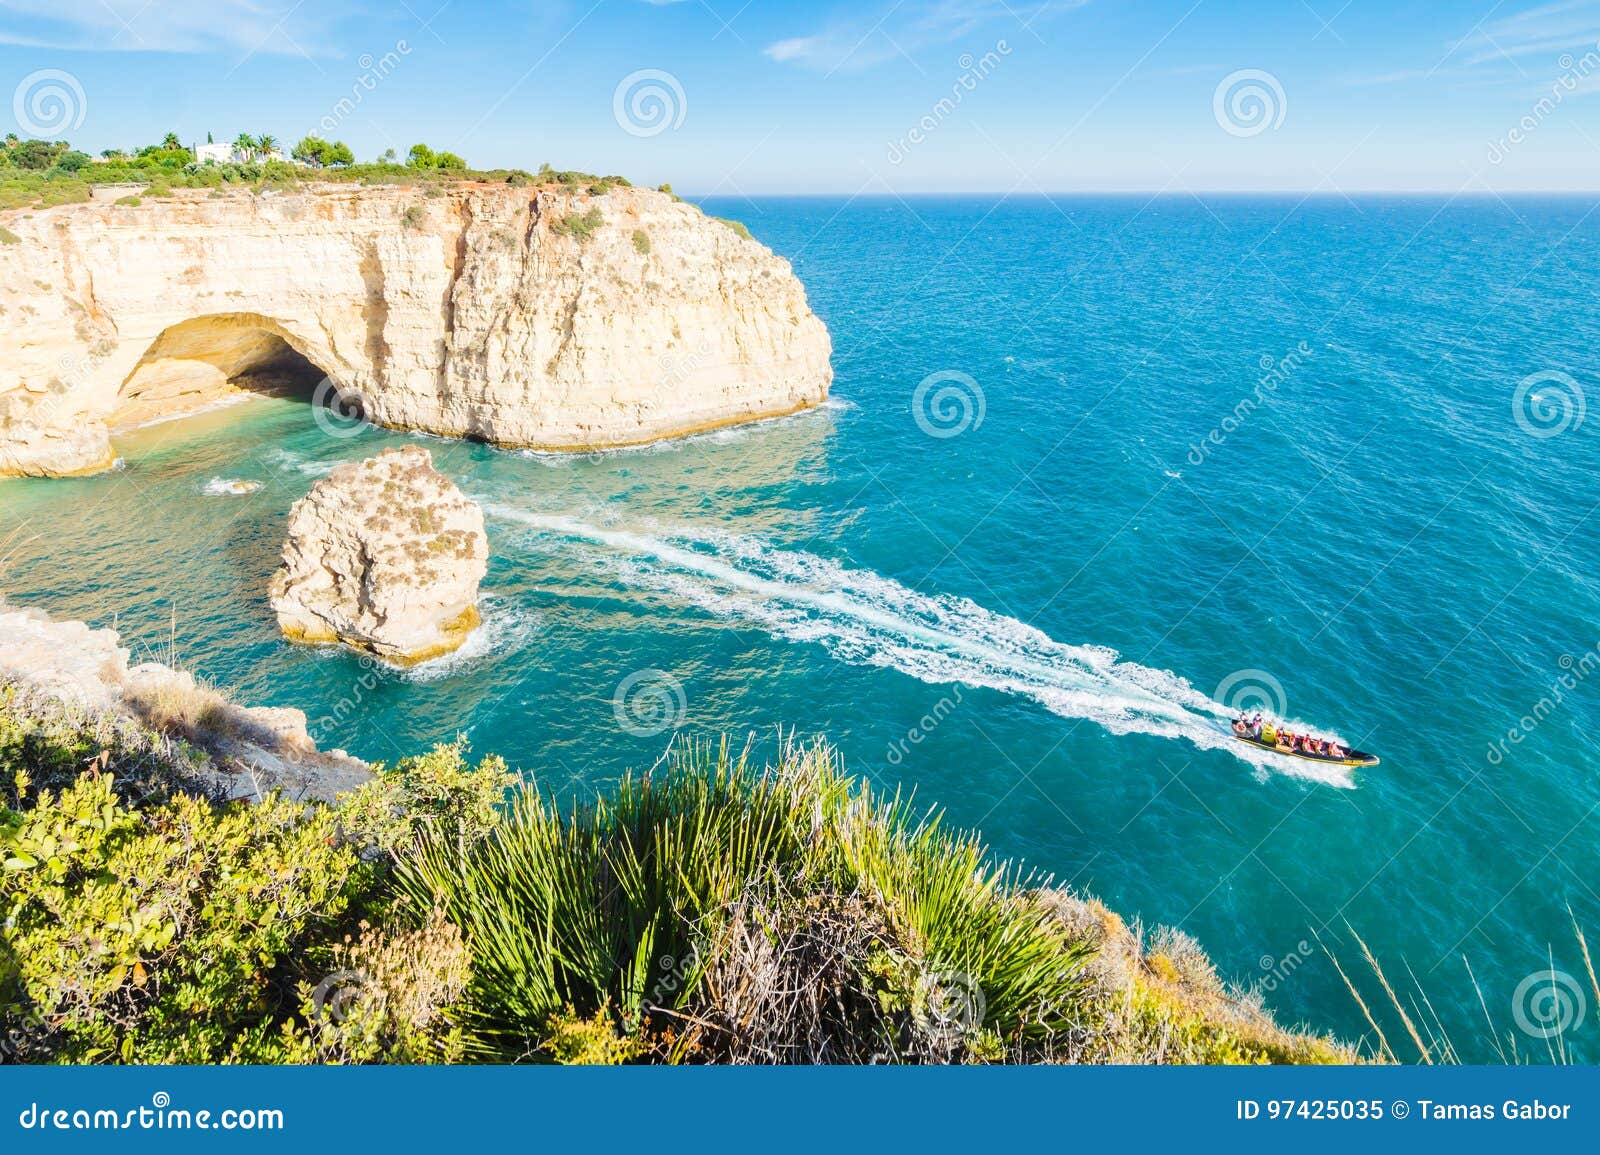 portugal algarve beach cave visited by experience boat.